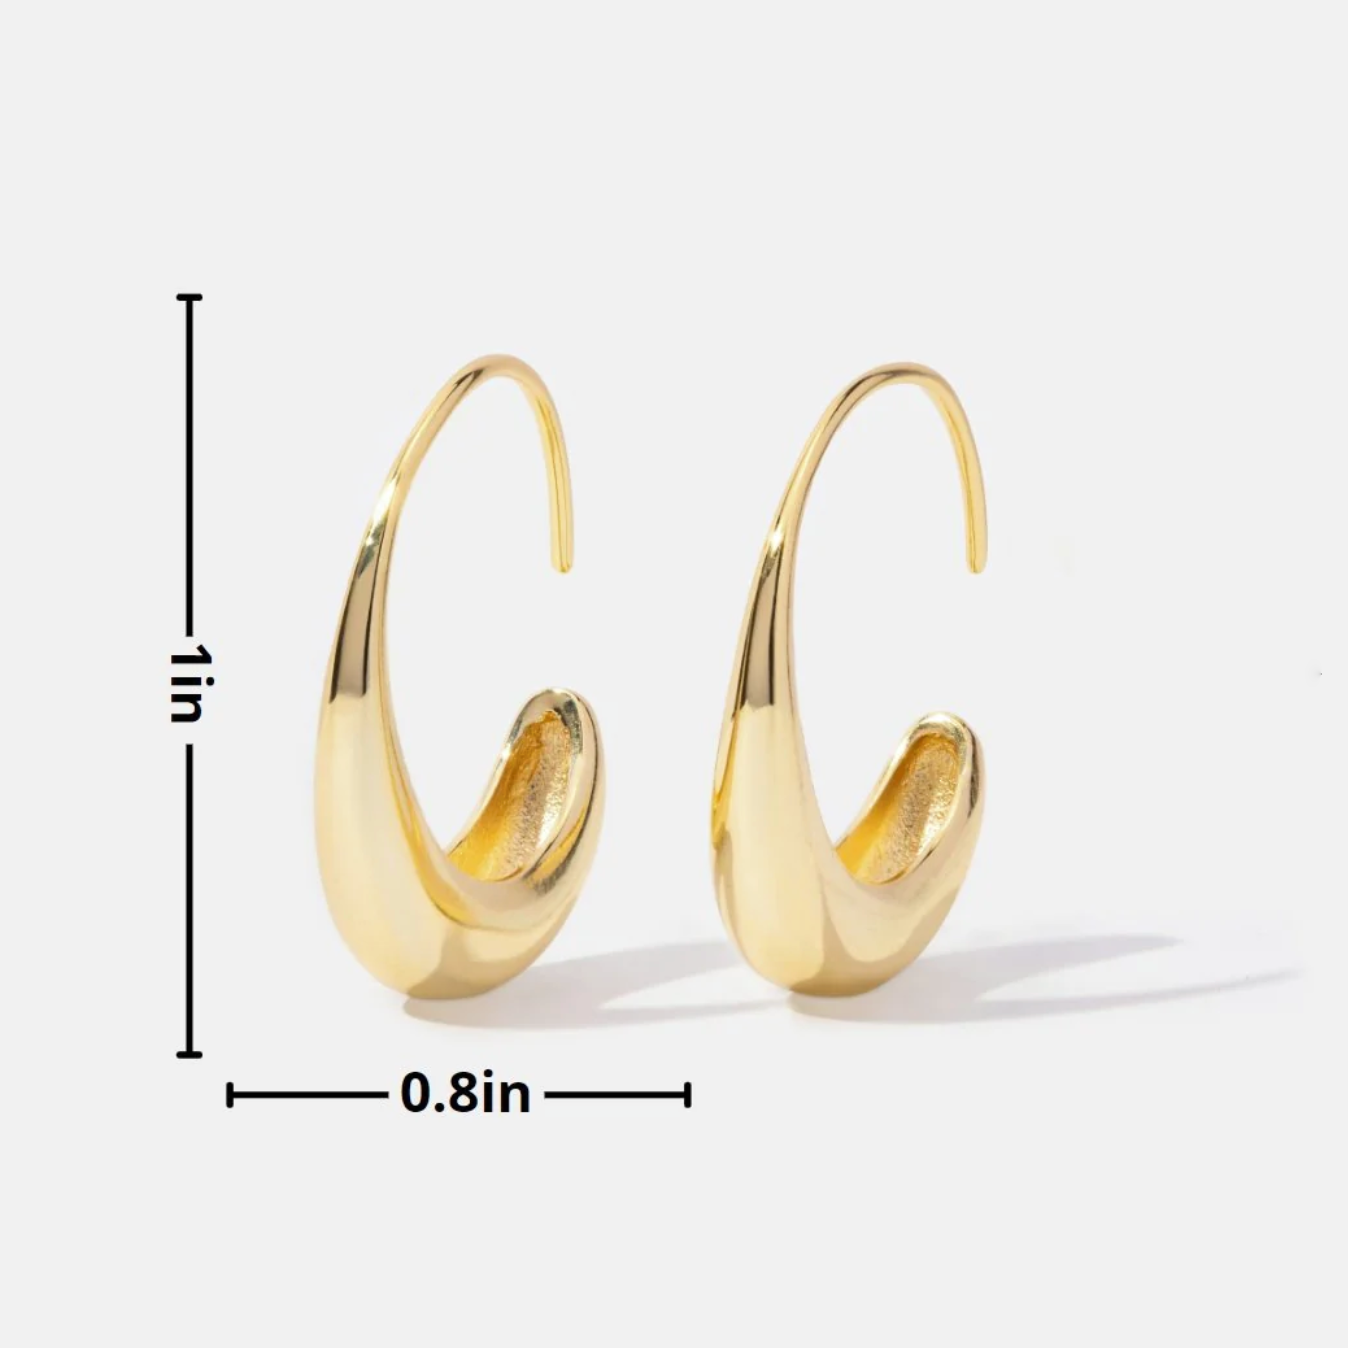 Large C form gold hoops for women